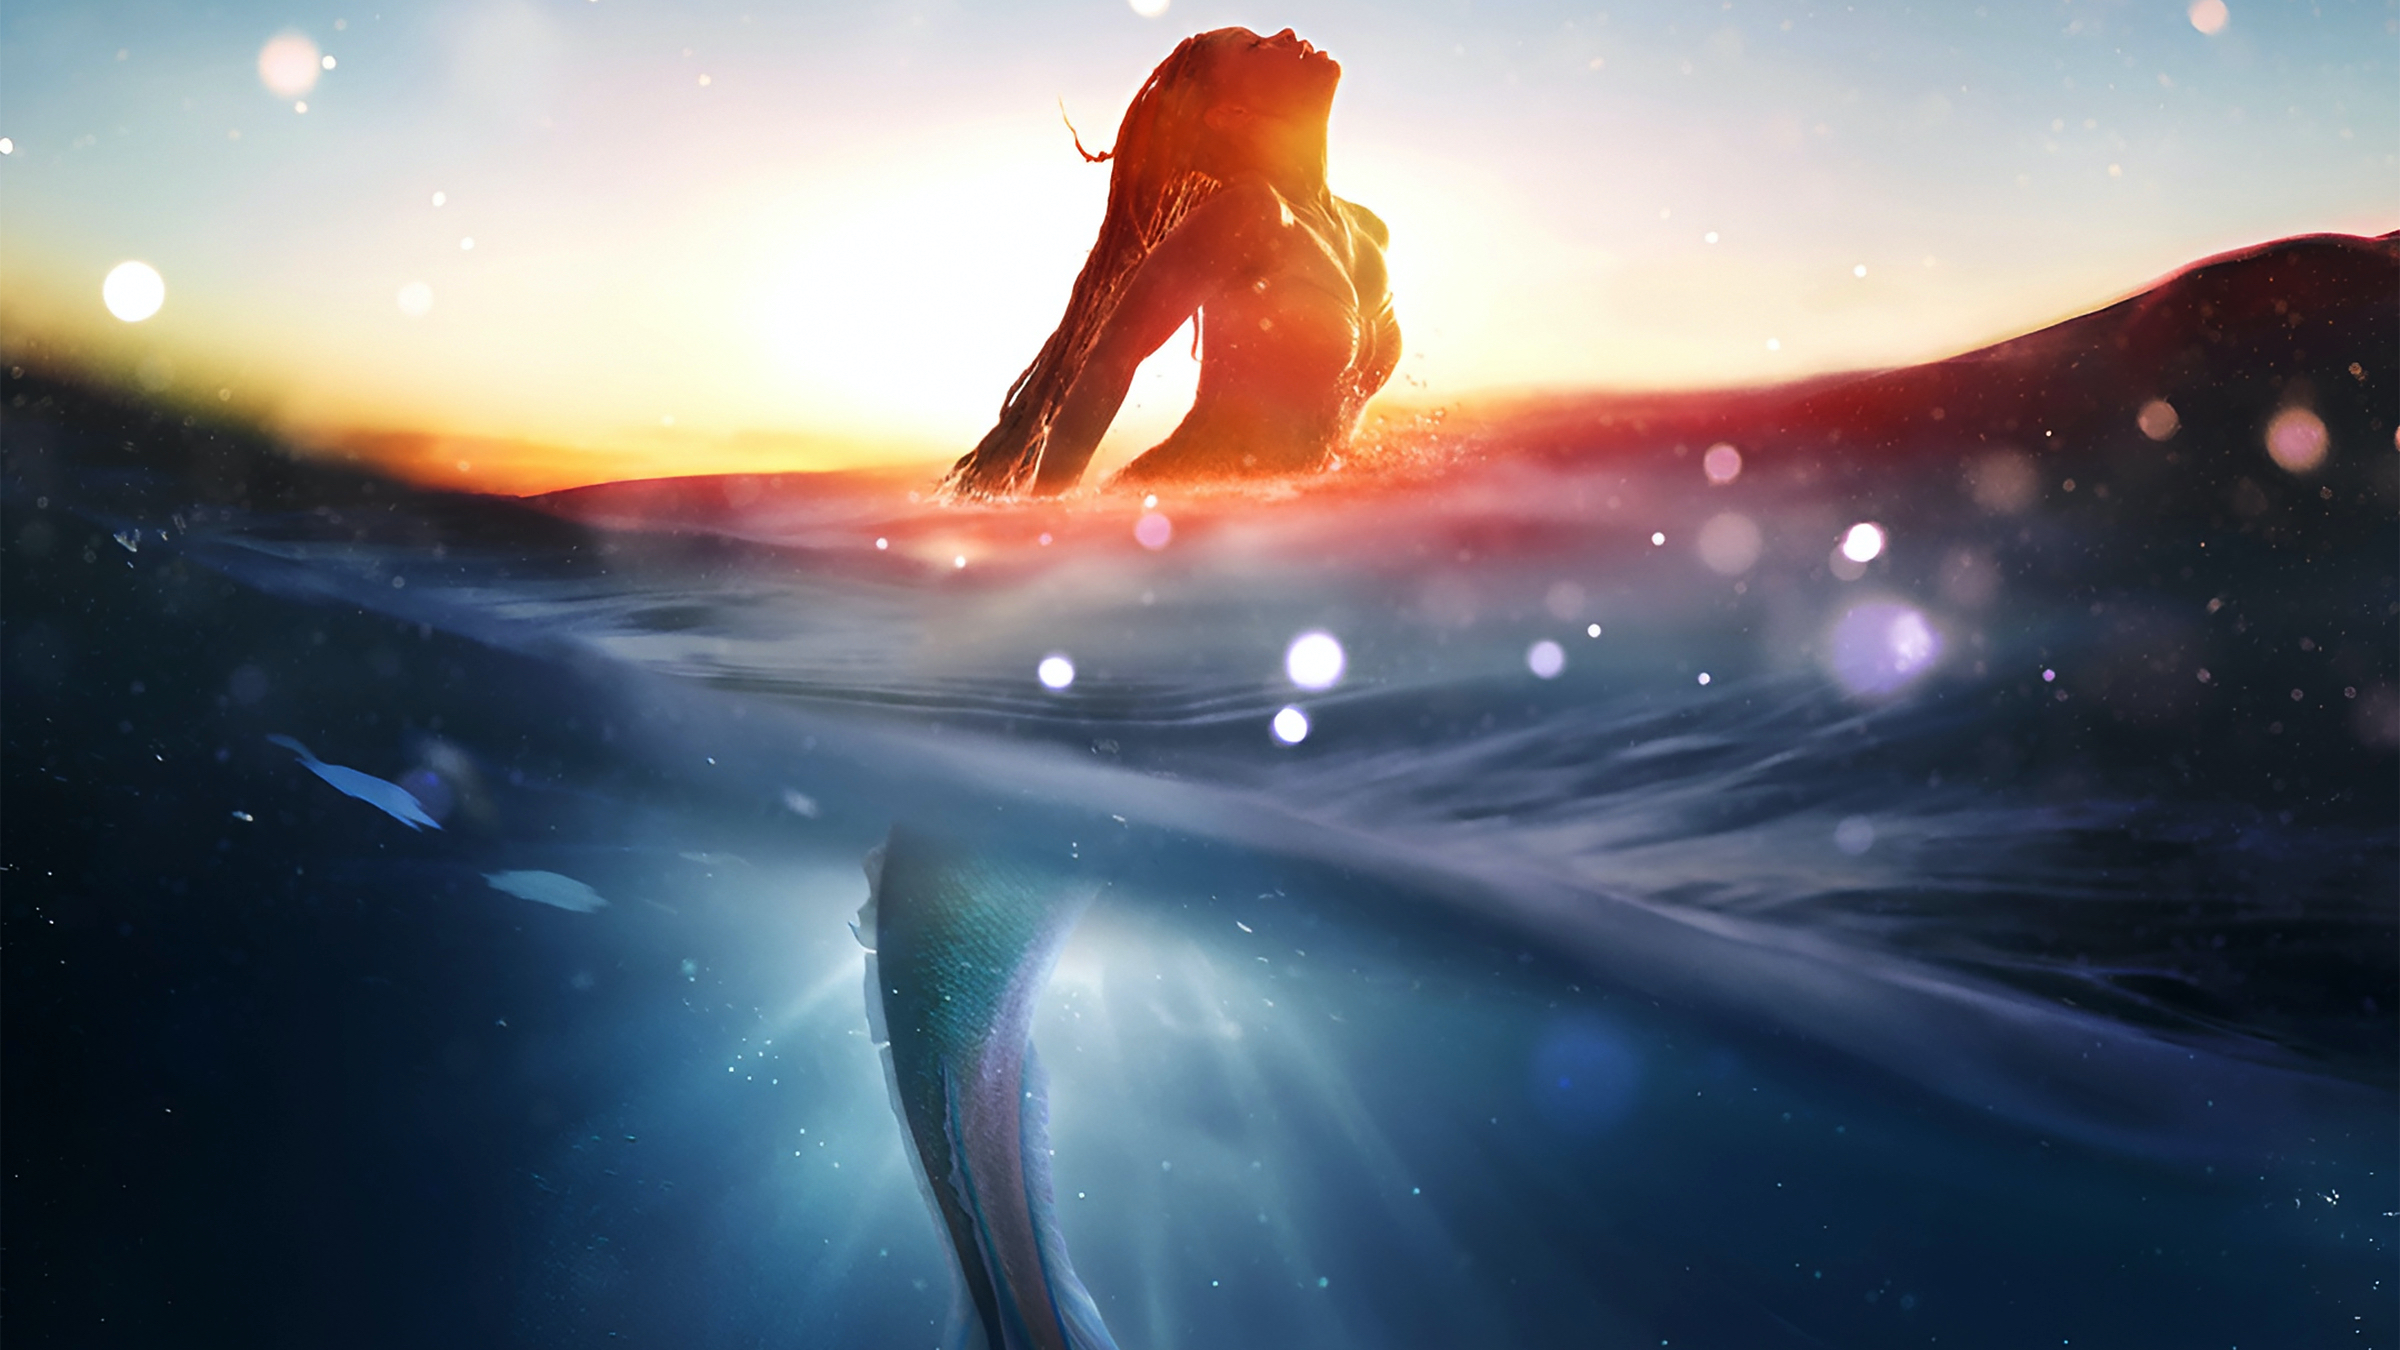 Movie The Little Mermaid (2023) HD Wallpaper | Background Image